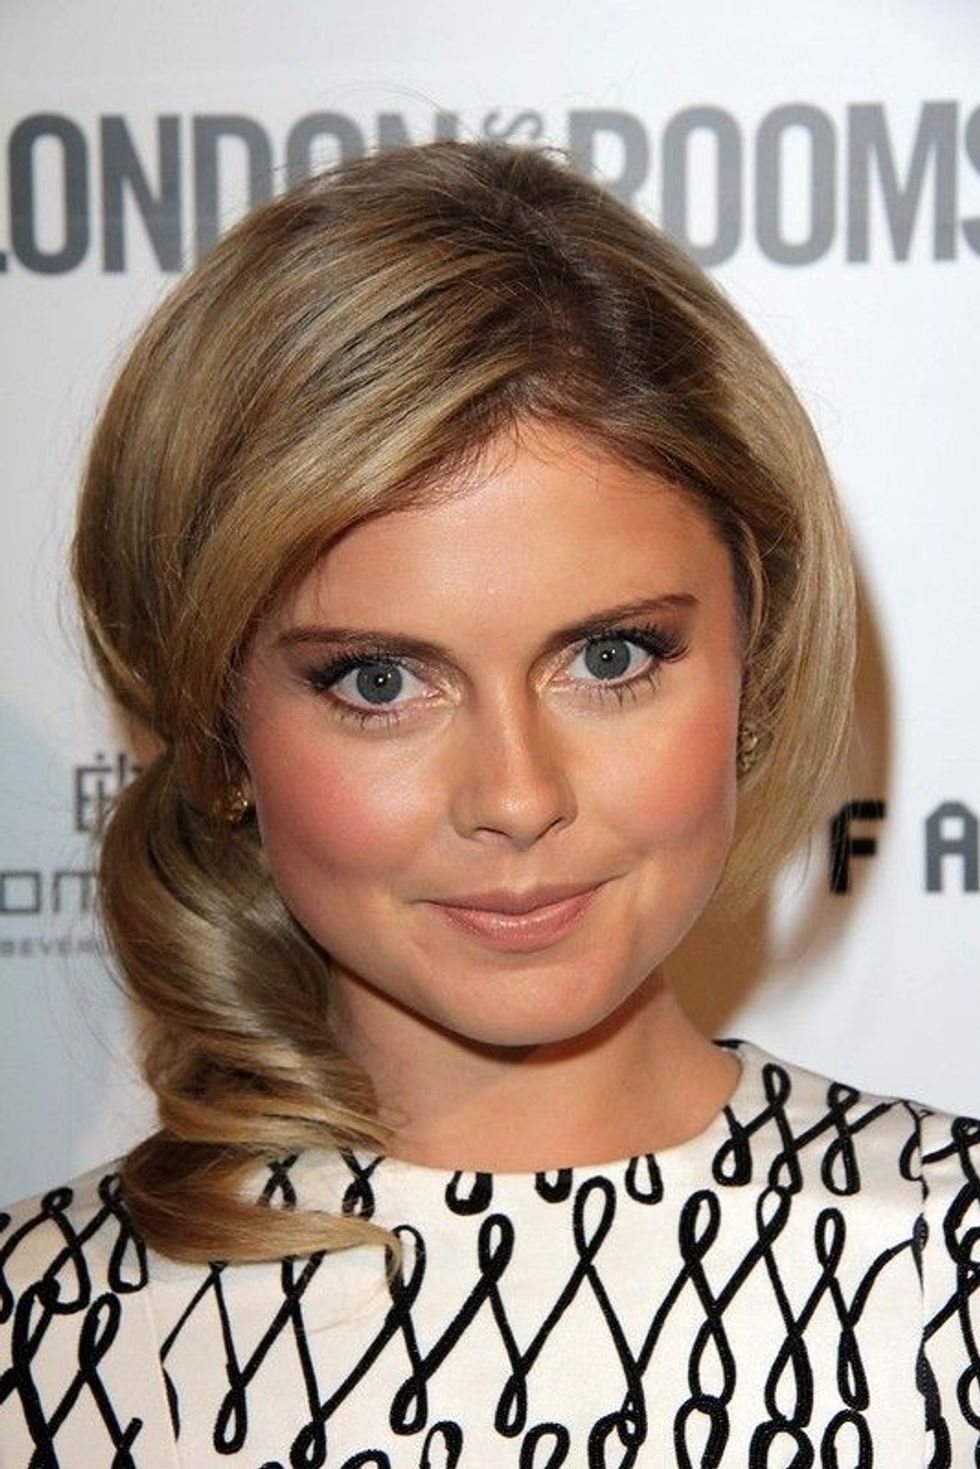 This article is about Rose McIver